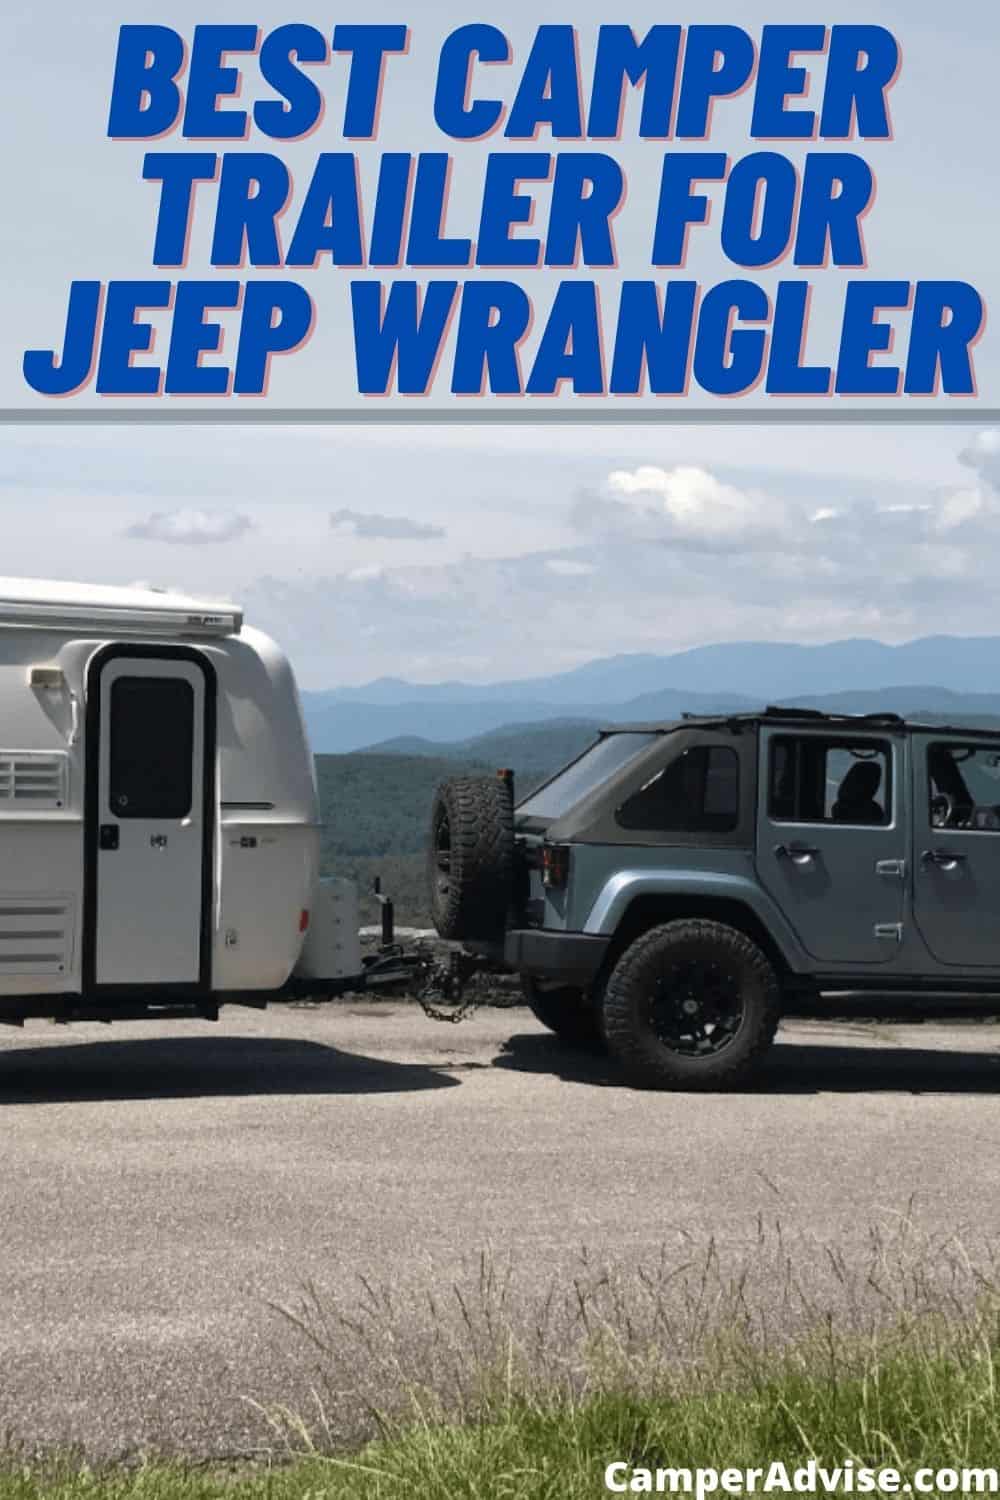 9 Excellent Camper Trailers for Jeep Wrangler (Jeep Campers)